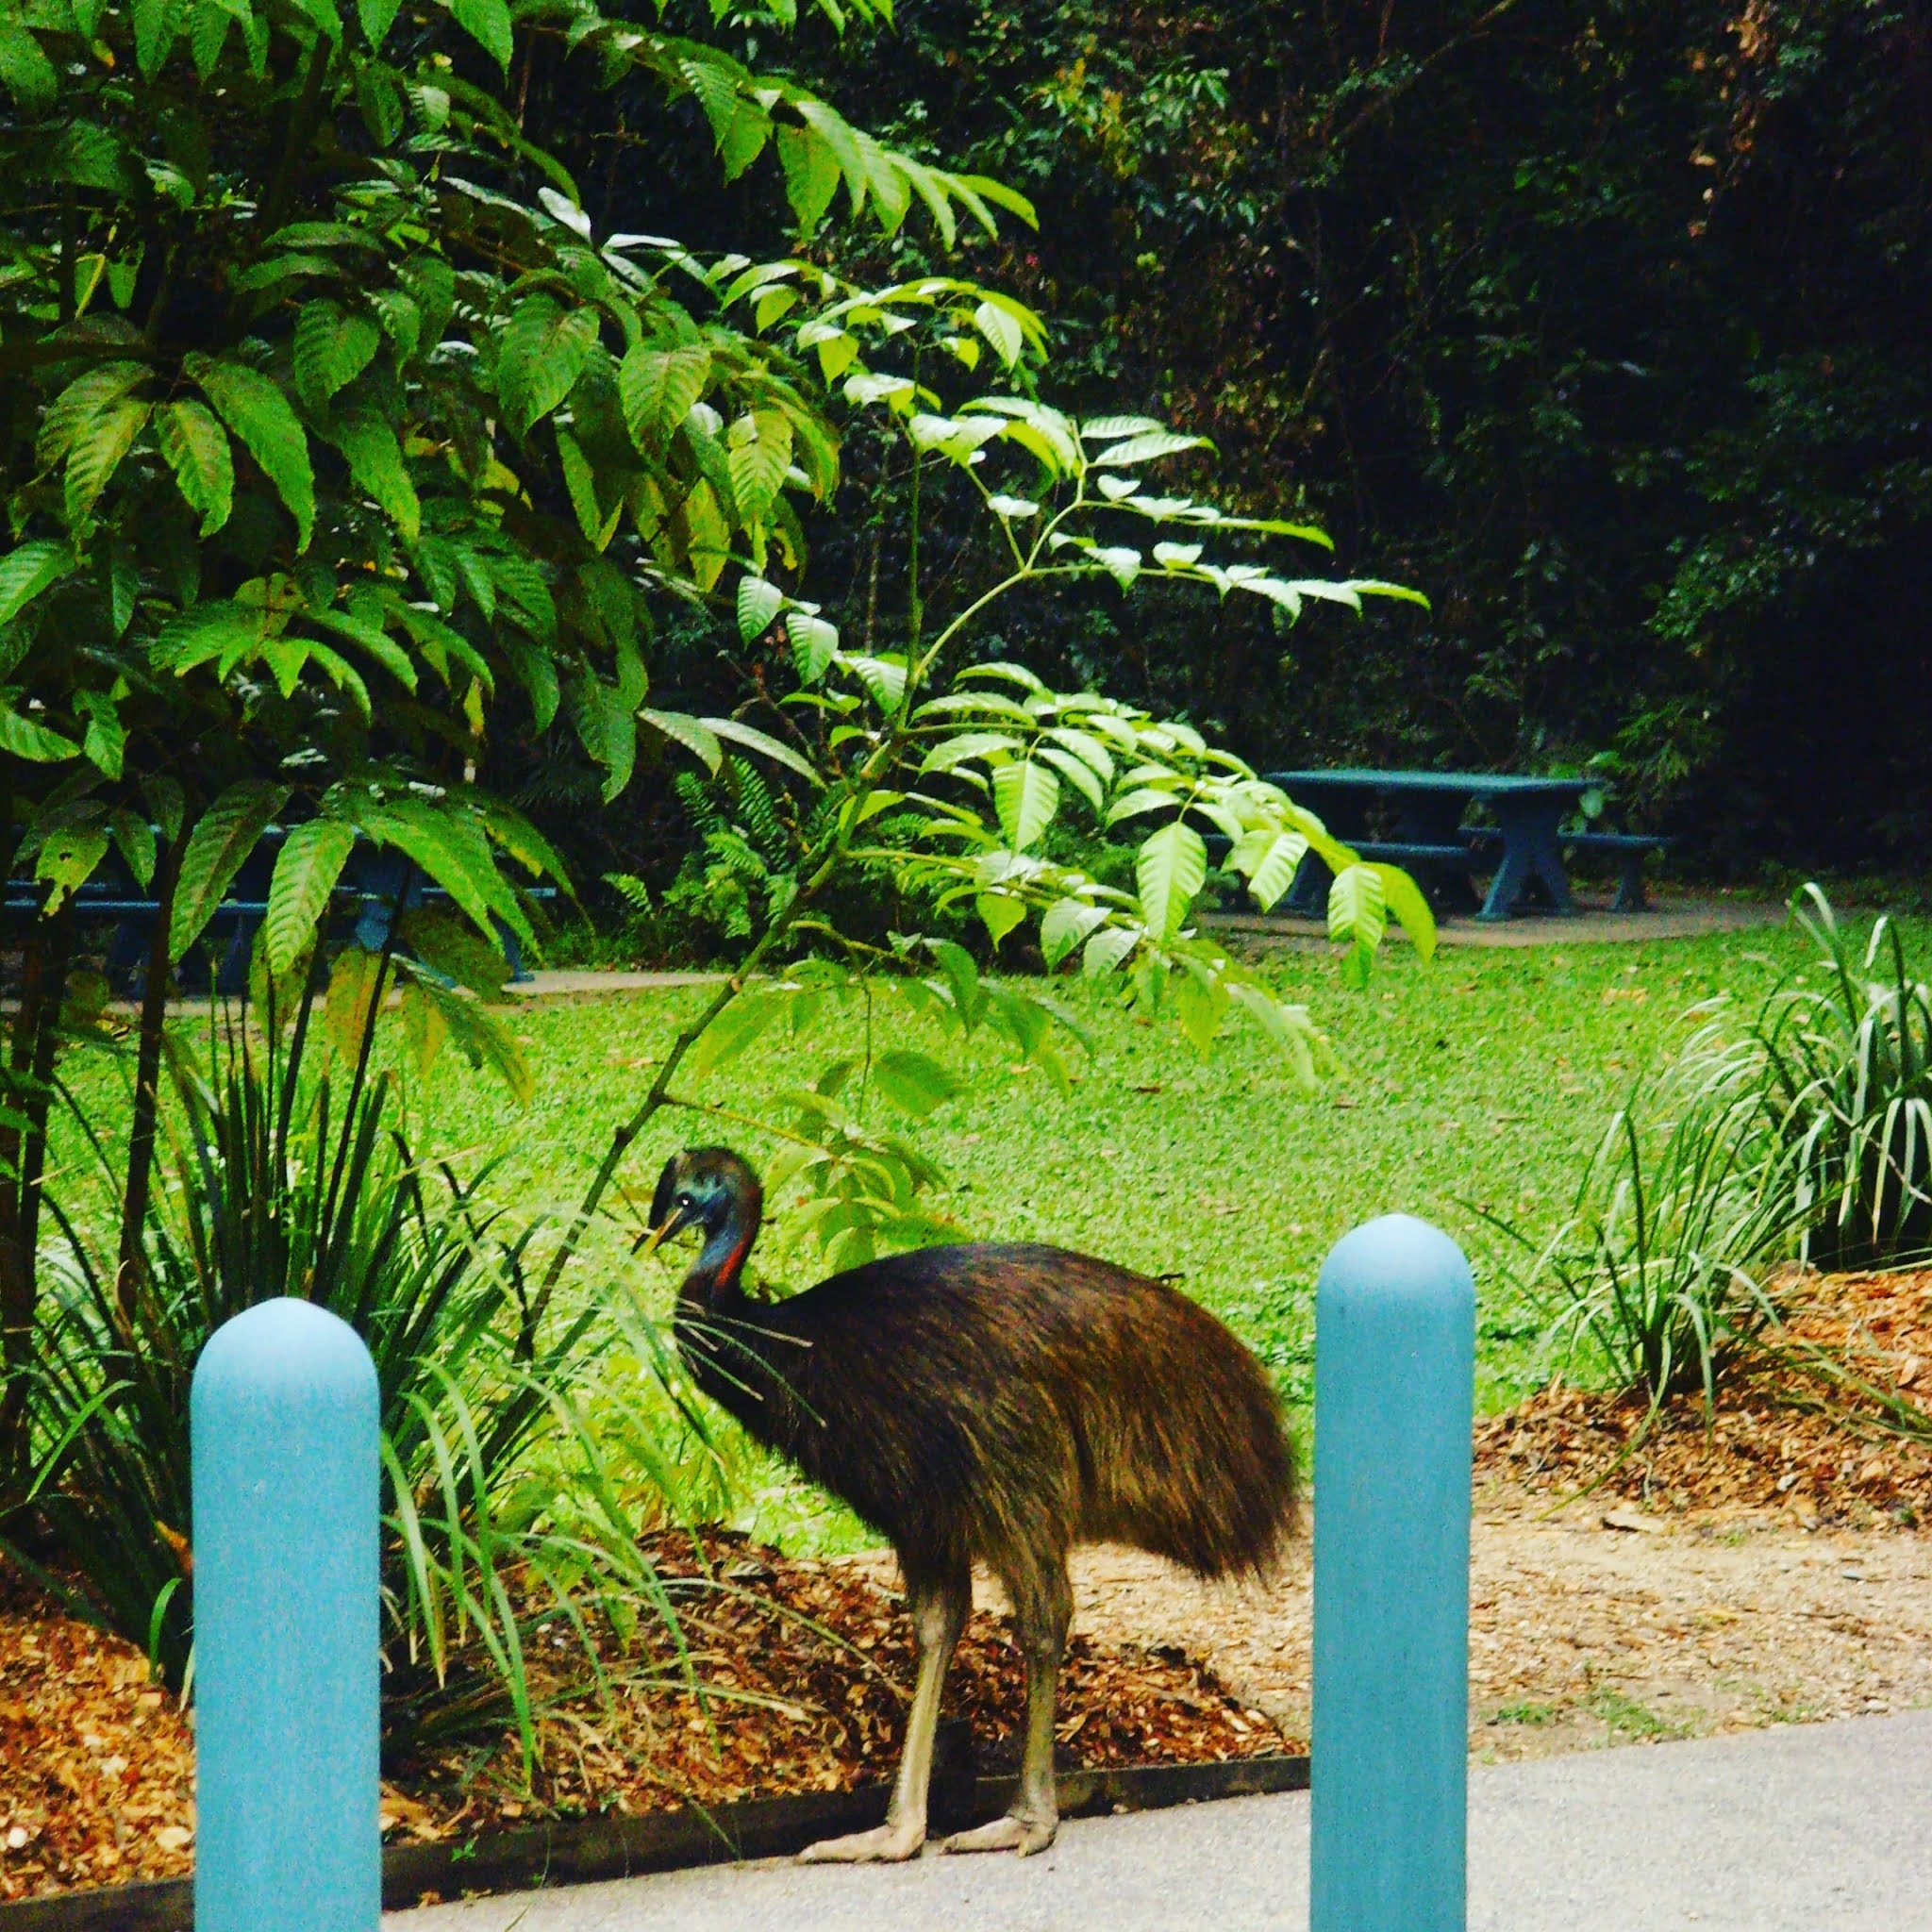 wild your cassowary in australia, spotted on the drive from Sydney to cairns